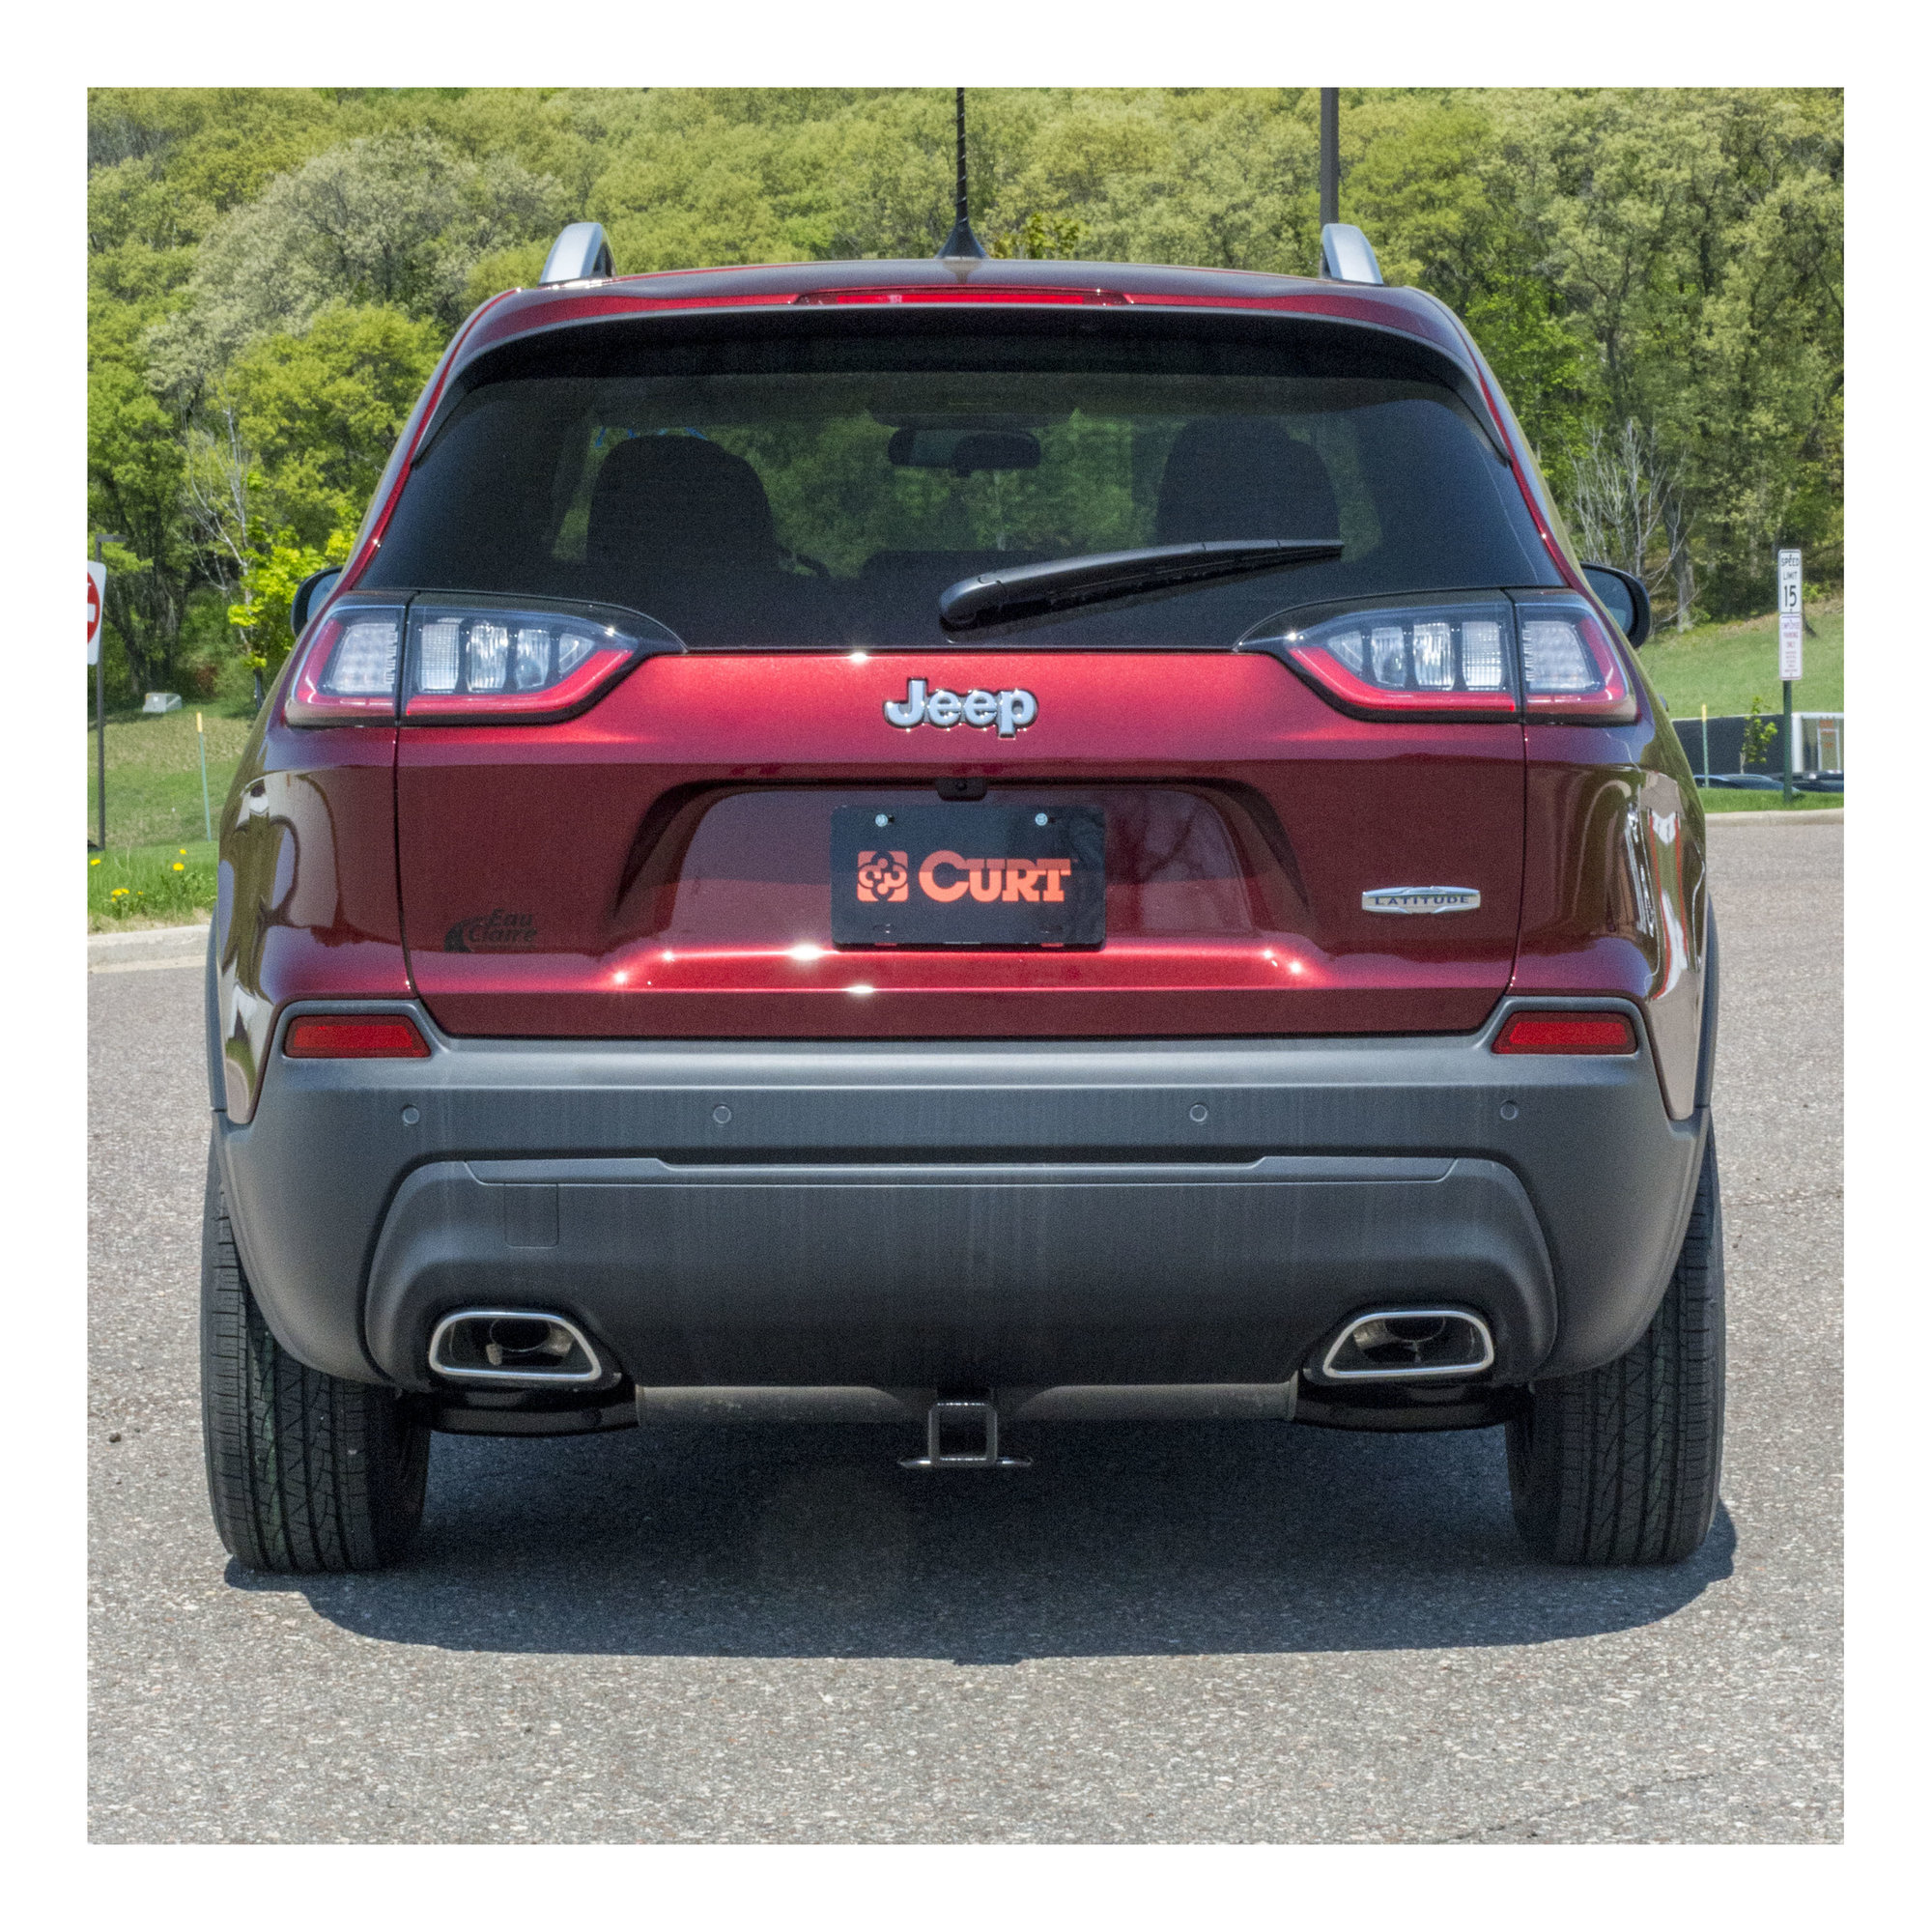 Trailer Hitch For 2019 Jeep Grand Cherokee